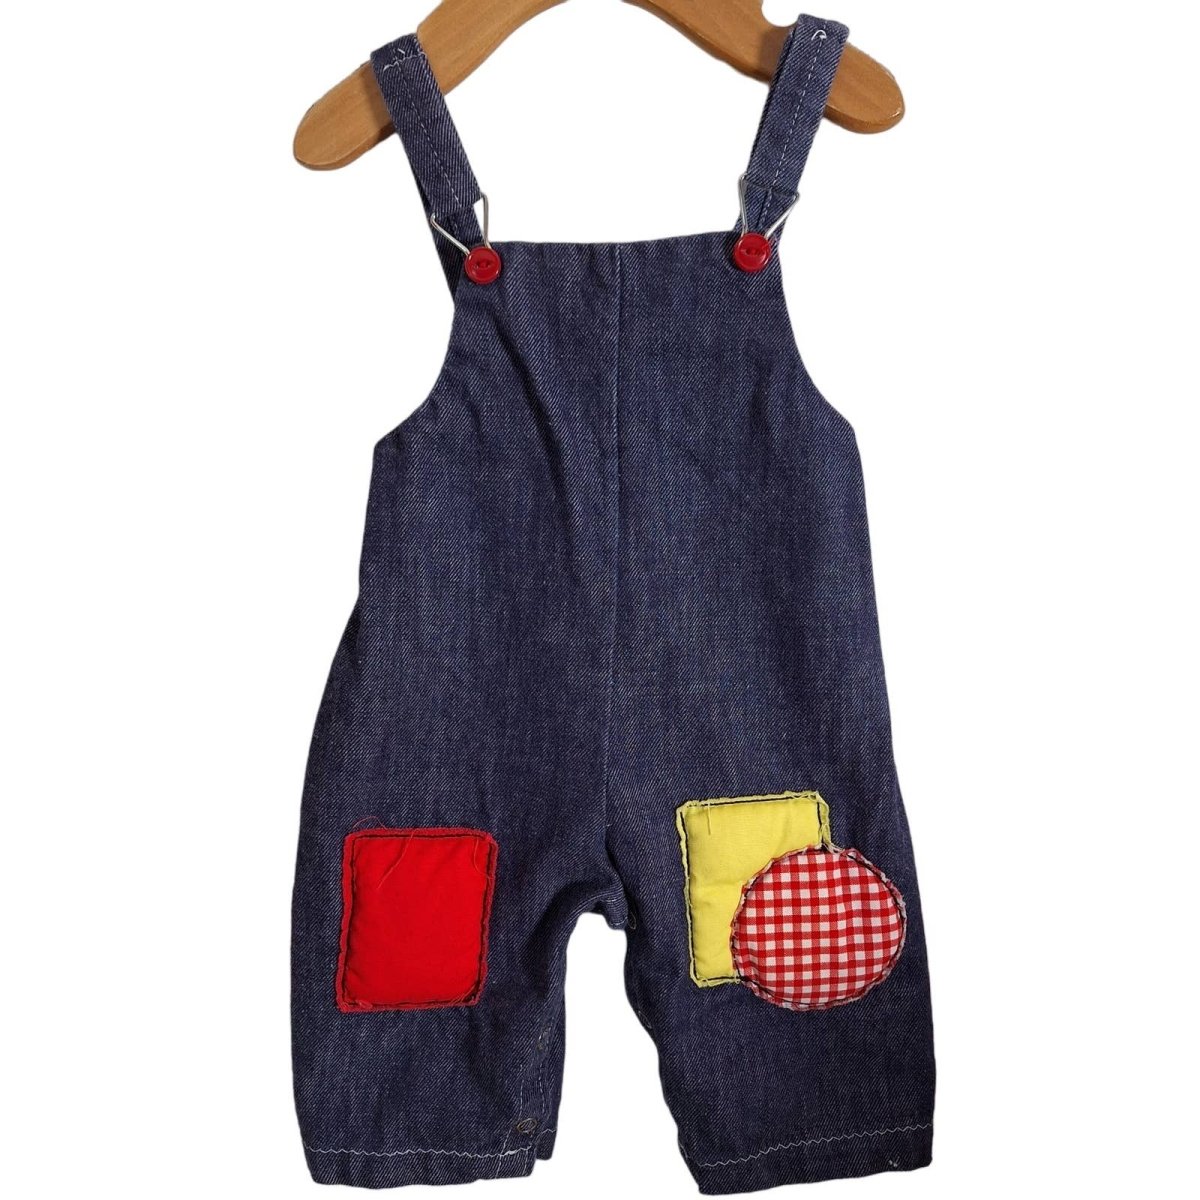 Vintage 70s Infant/Toddler Denim Overalls Unisex Size UP TO 18 Months - themallvintage The Mall Vintage